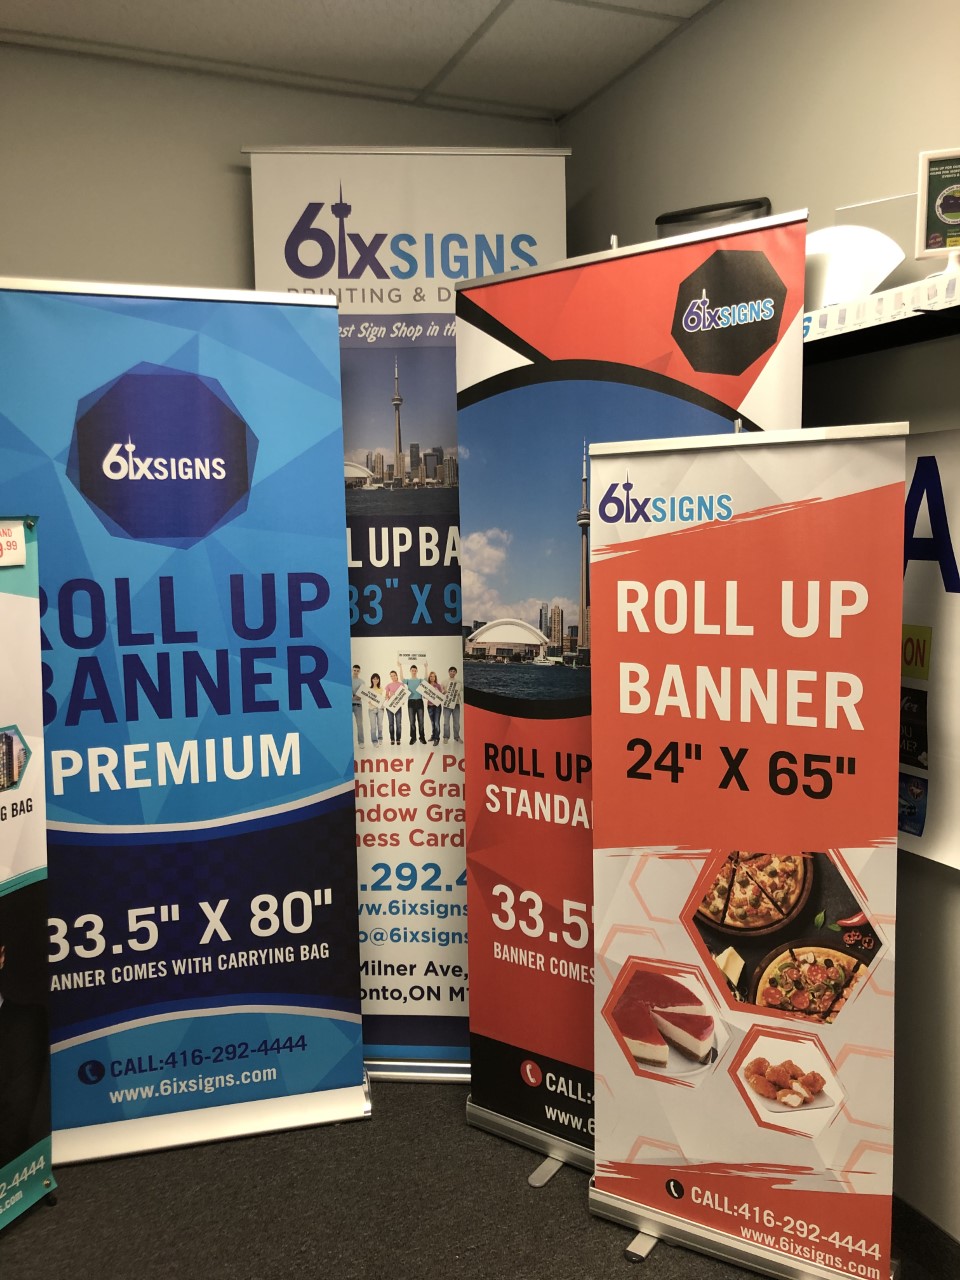 6ix Signs Ltd. | store | 120 Milner Ave #9, Scarborough, ON M1S 3R2, Canada | 4162924444 OR +1 416-292-4444